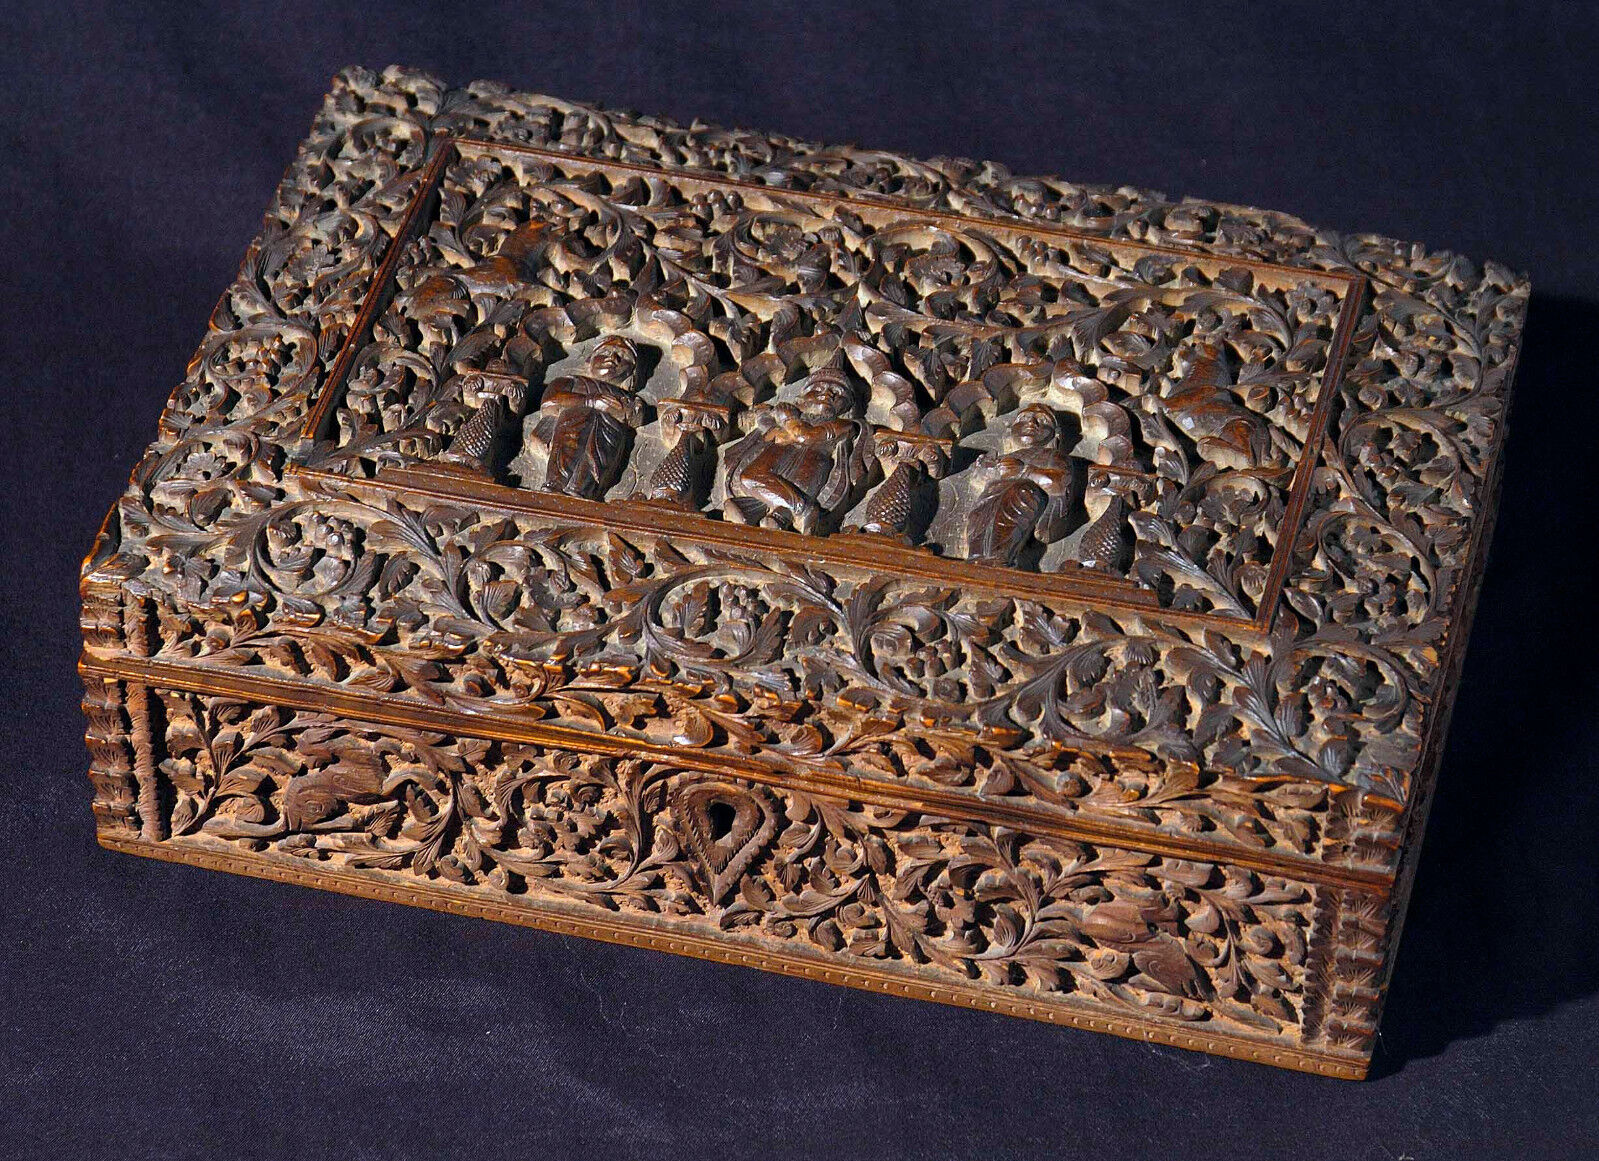 Antique carved Anglo-Indian sandal wood box, Mysore South India 19th century